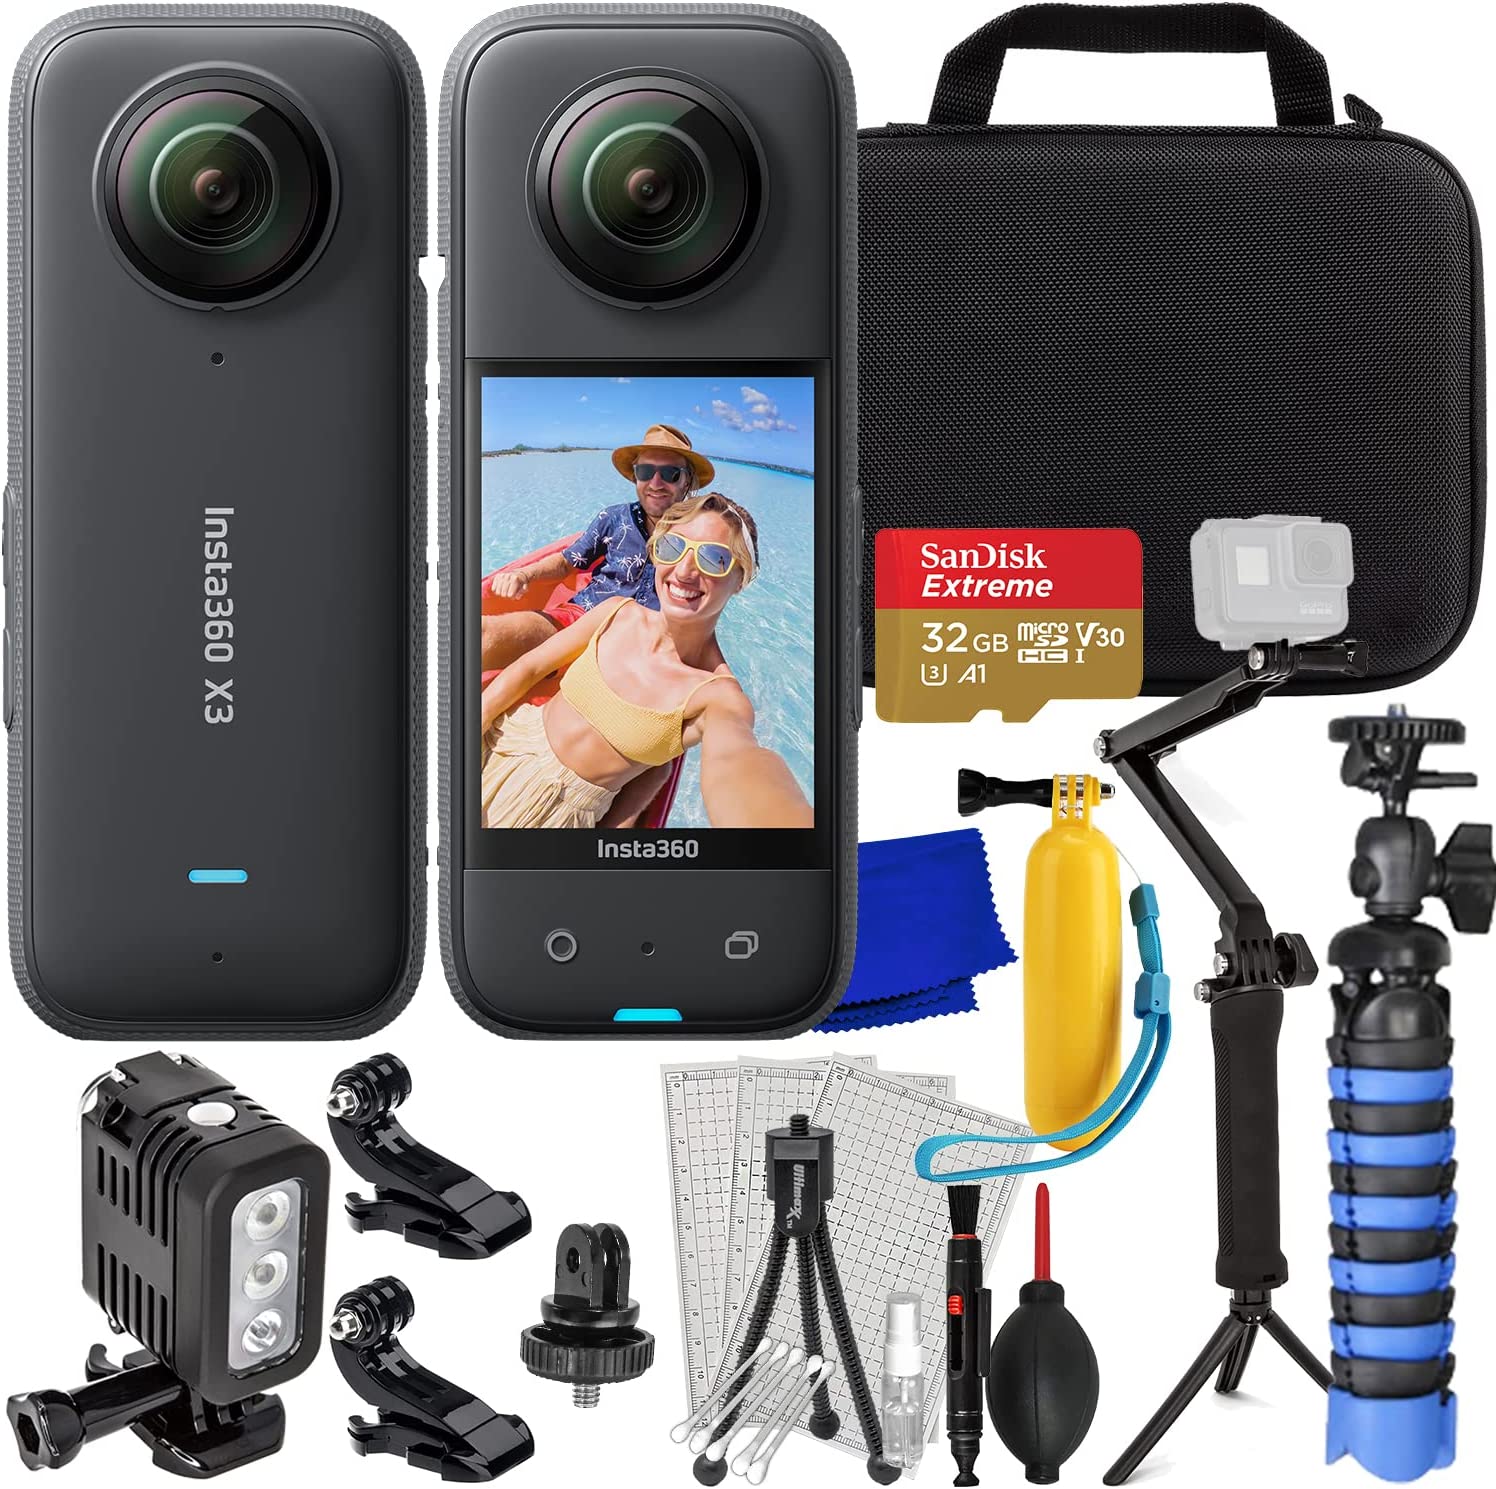 Insta360 ONE X3 with Ultimaxx Advanced Action Bundle + SanDisk 32GB Extreme microSDHC, 40M Underwater LED Light, 3-in-1 Action Camera Multi-Grip, Mini “Gripster” Tripod & Much More (21pc Bundle)